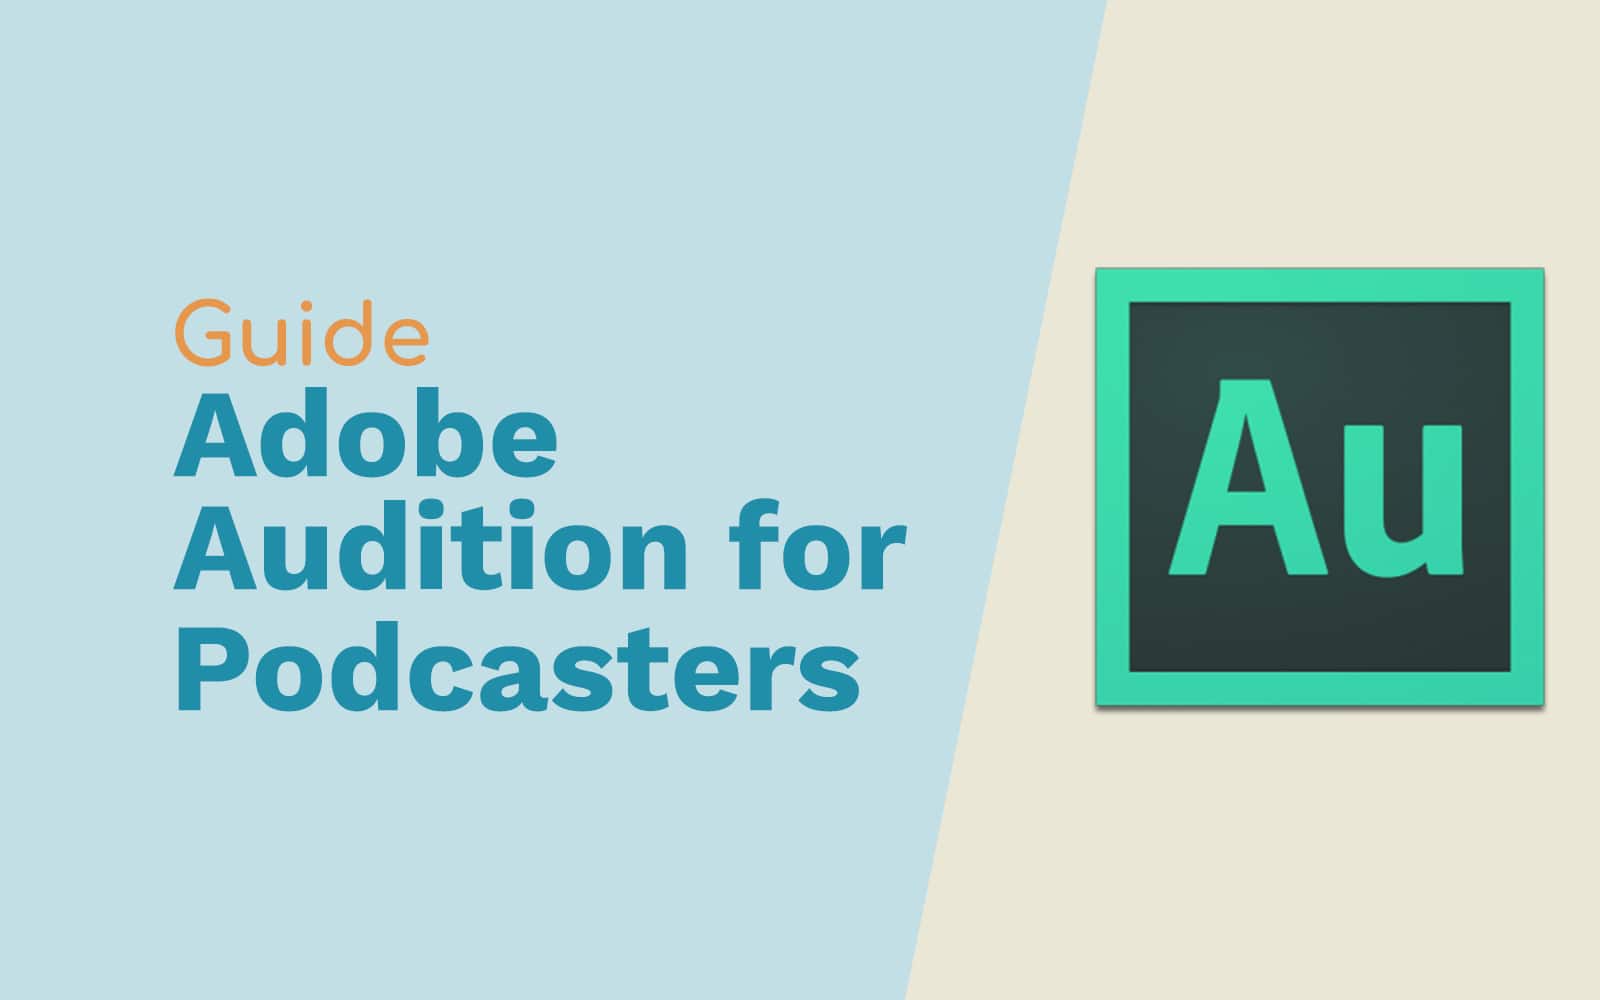 A Guide To Adobe Audition For Podcasters Podcasting Adobe Audition Music Radio Creative